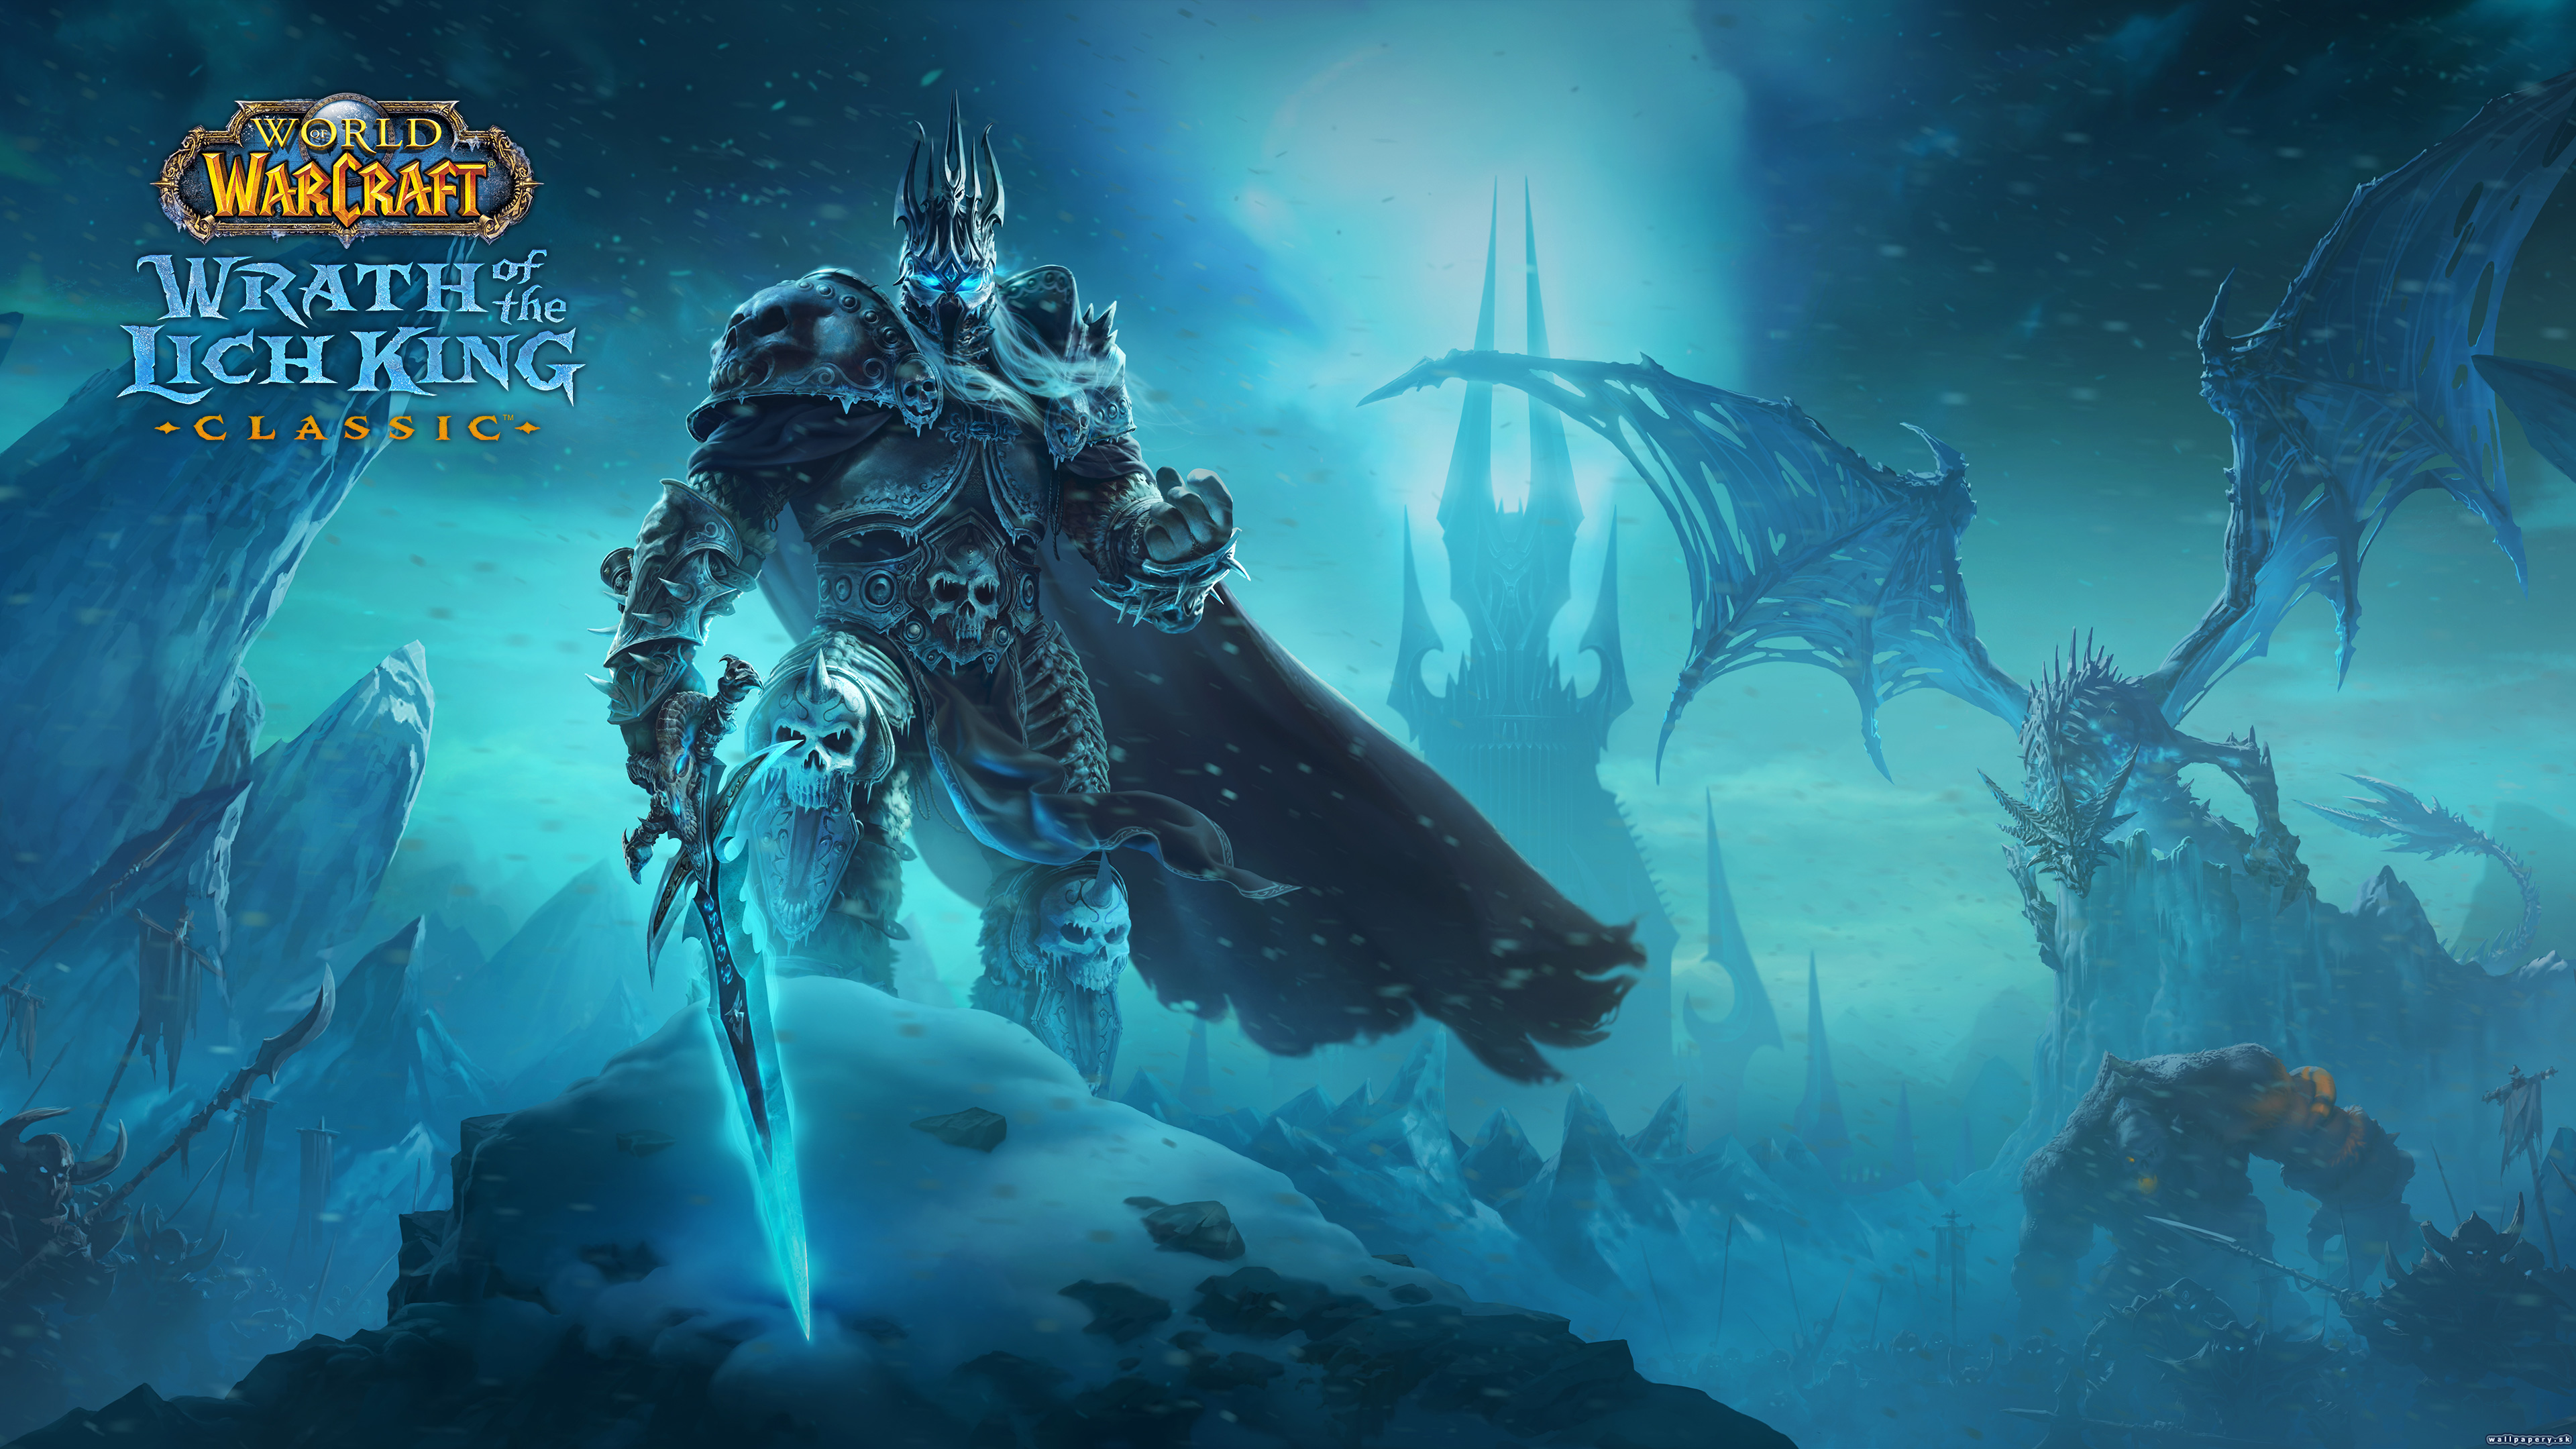 World of Warcraft: Wrath of the Lich King Classic - wallpaper 1